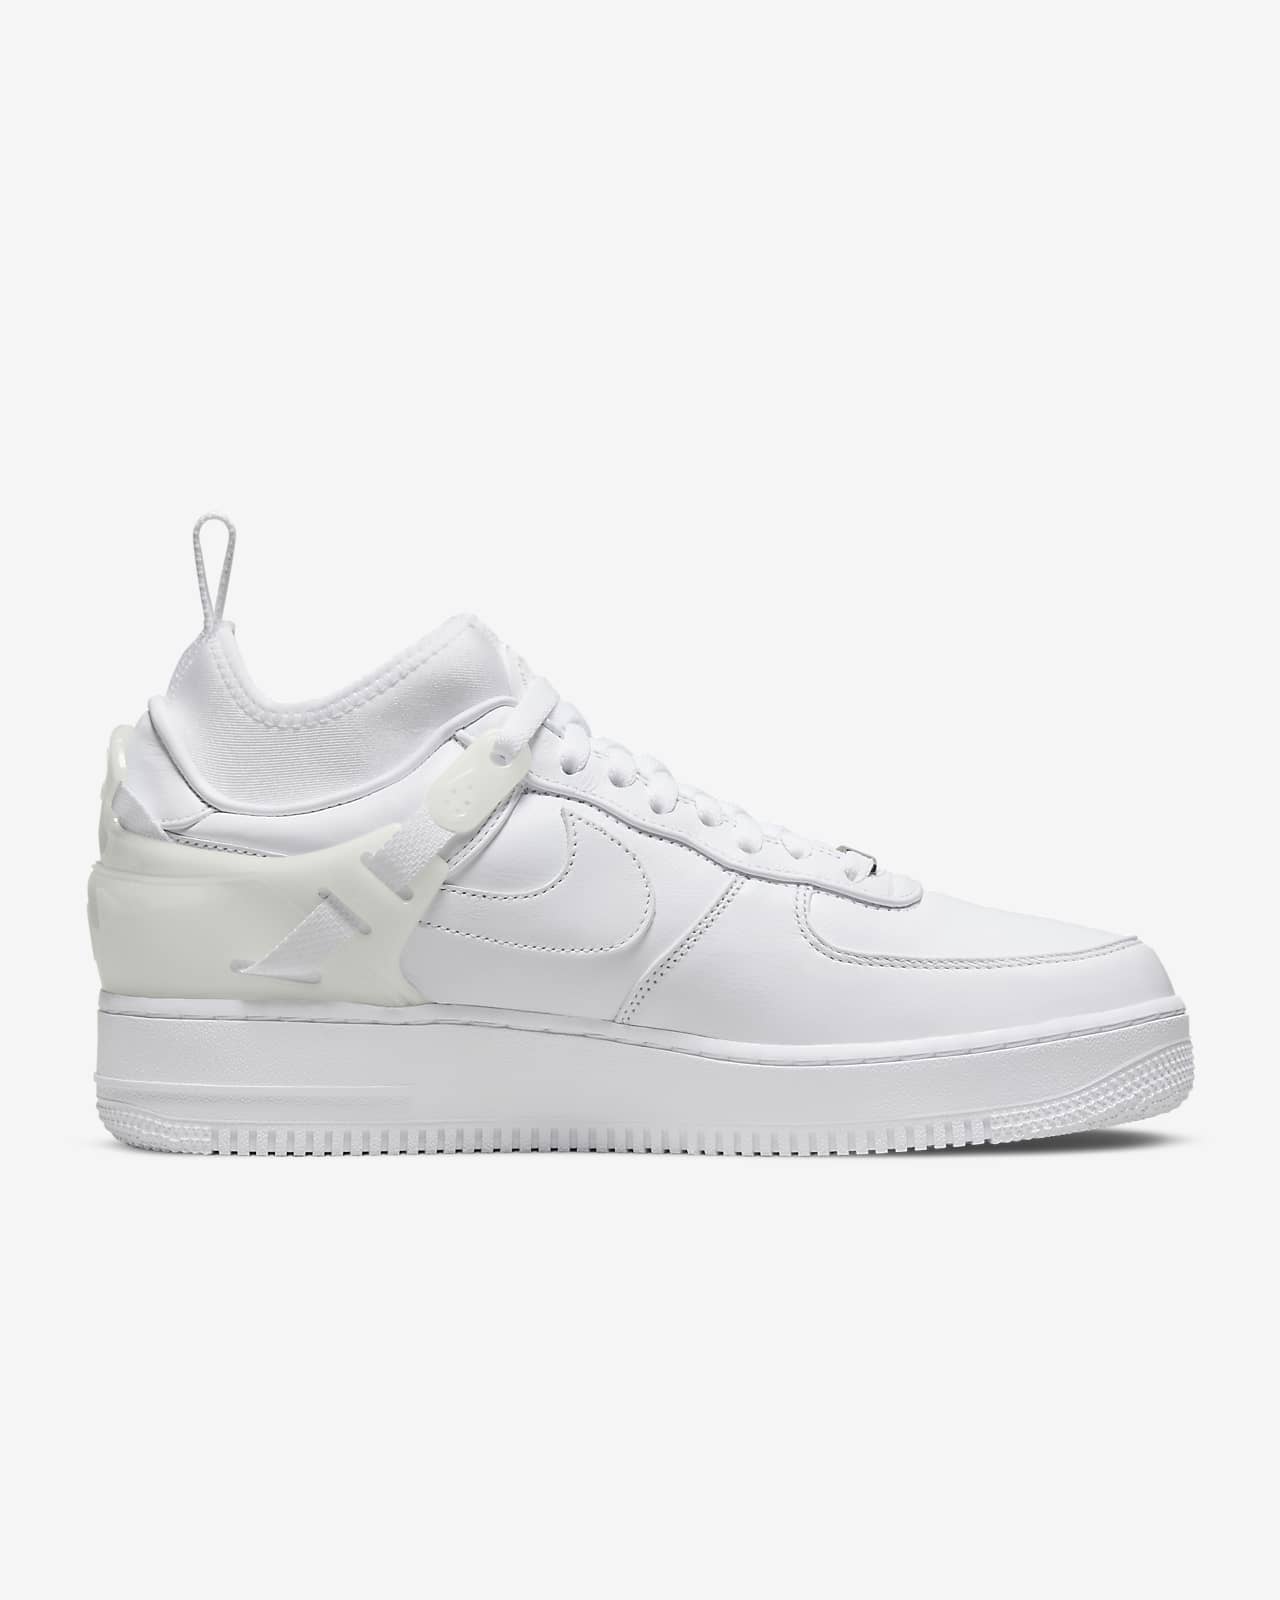 Nike Air Force 1 Low SP x UNDERCOVER - Hombre. Nike ES